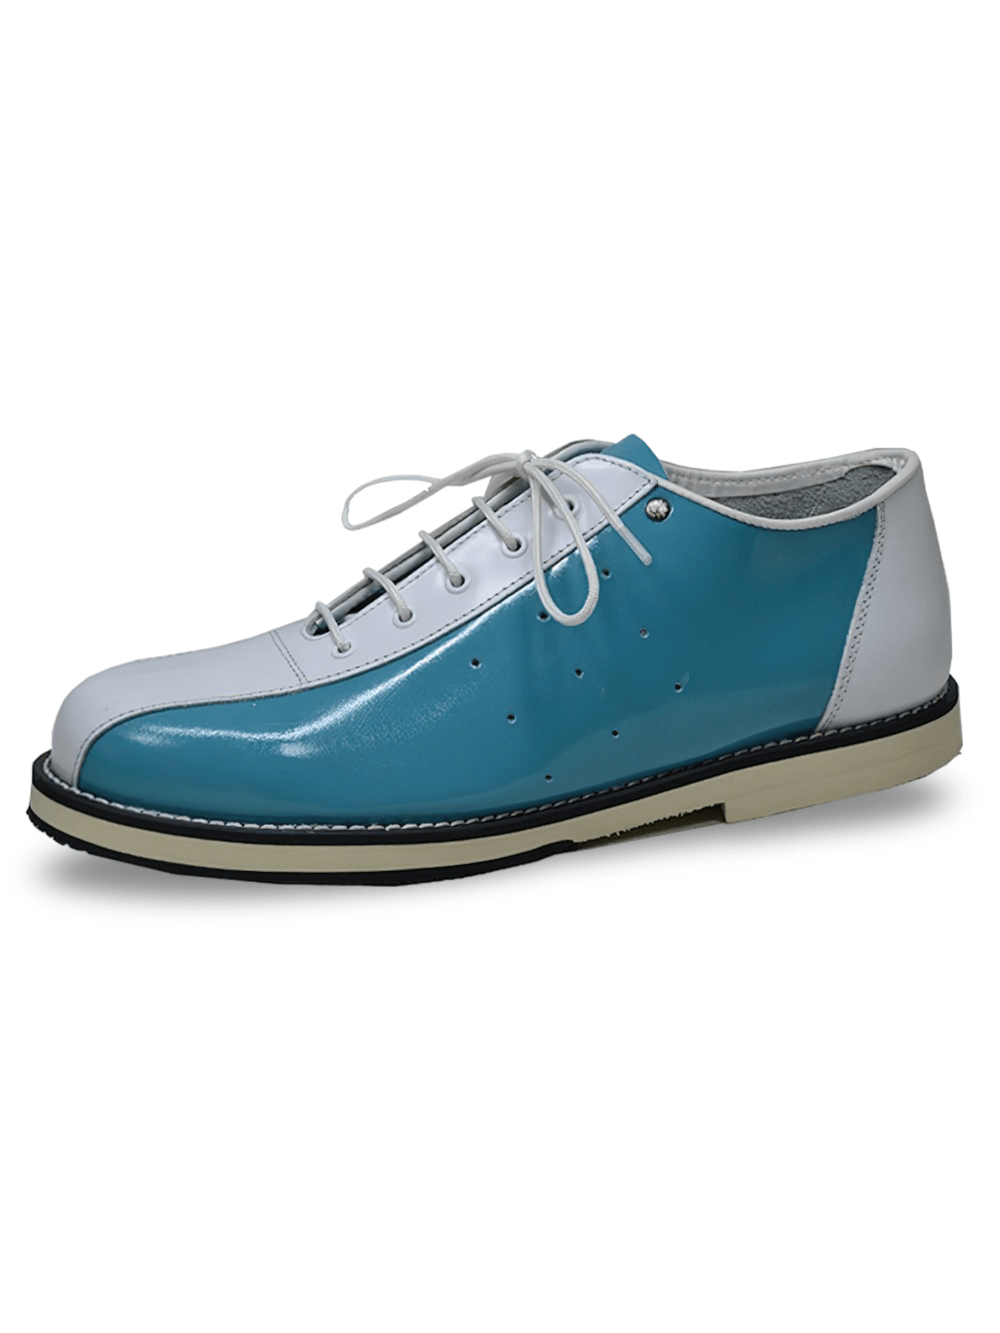 Patent Blue And White Bowling Shoes With Neolite Sole